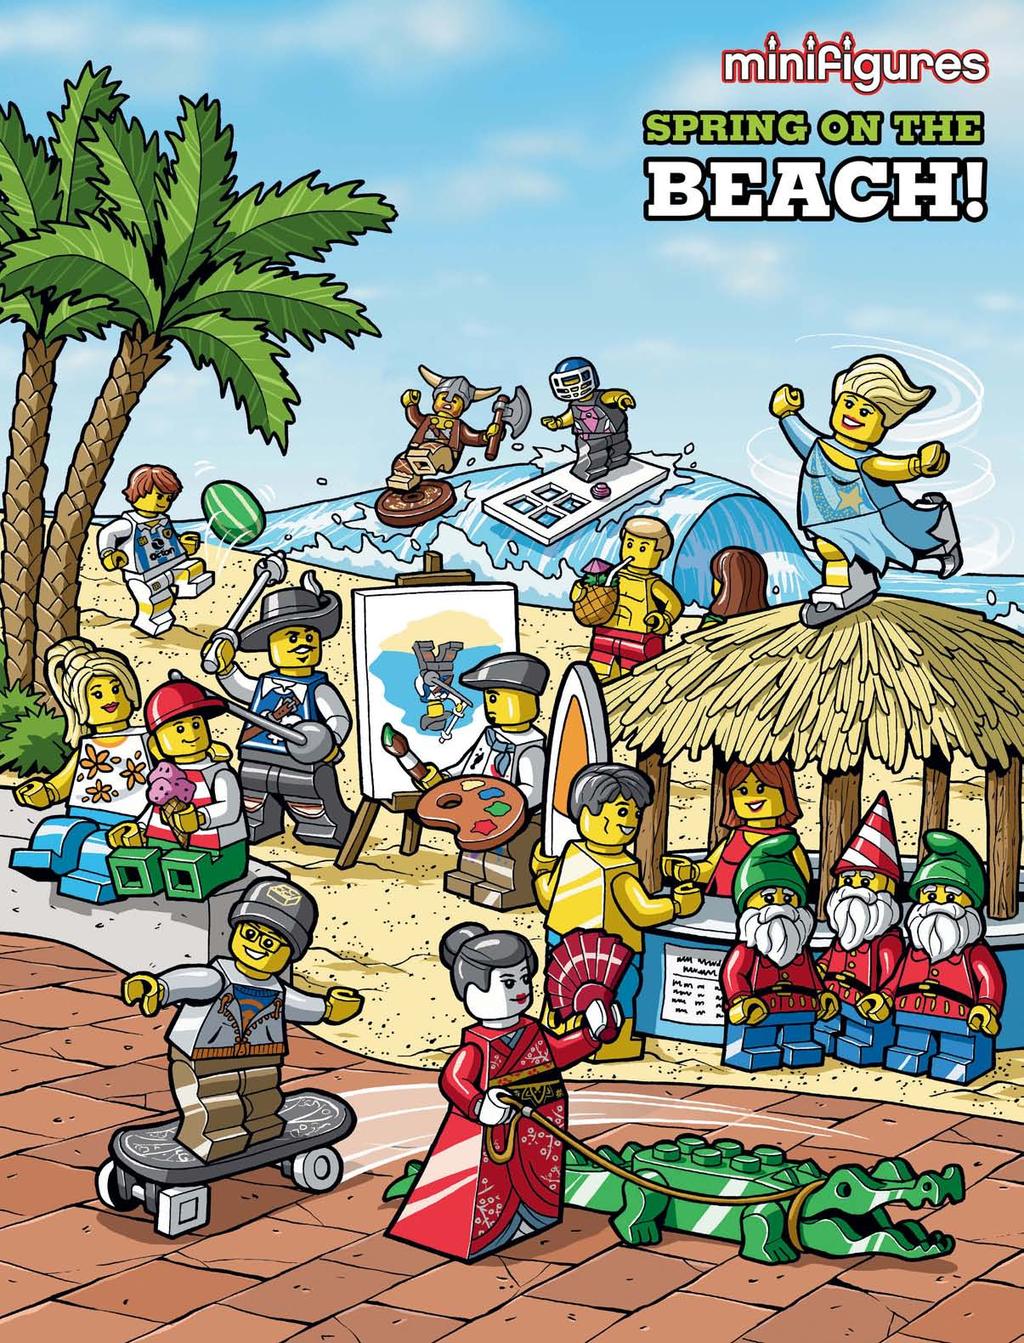 I t s a beautiful, warm day on the beach. All the minifigures are having fun.